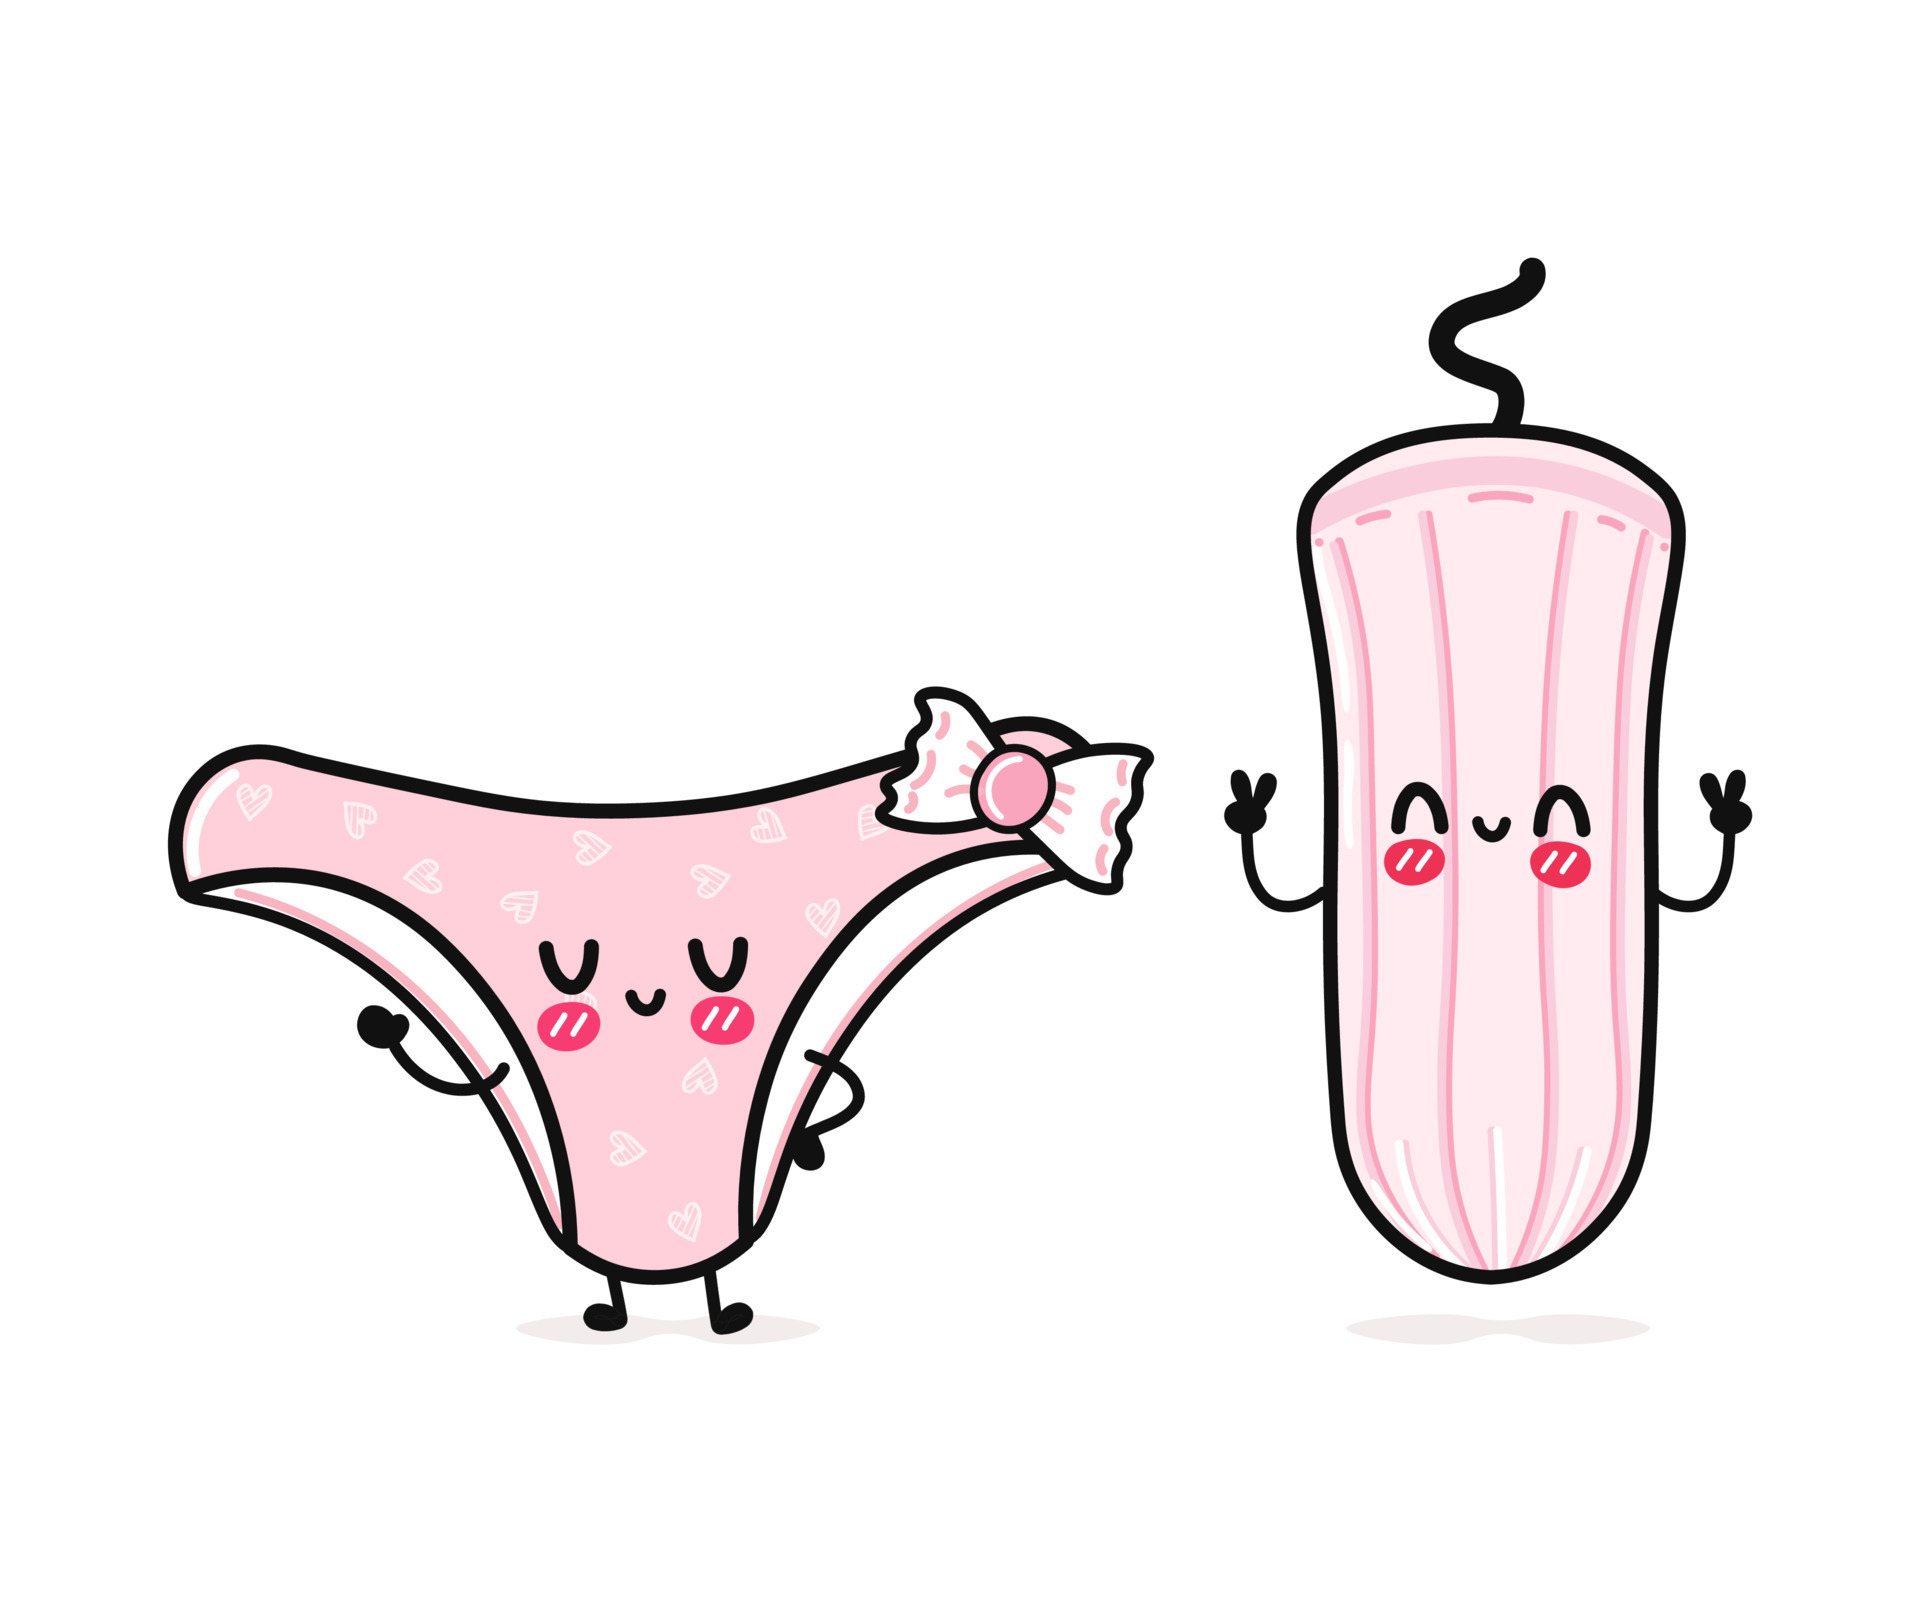 https://static.vecteezy.com/system/resources/previews/017/243/438/original/cute-funny-happy-pink-panties-and-tampon-menstrual-hand-drawn-cartoon-kawaii-characters-illustration-icon-funny-happy-cartoon-pink-panties-and-tampon-menstrual-mascot-friends-vector.jpg